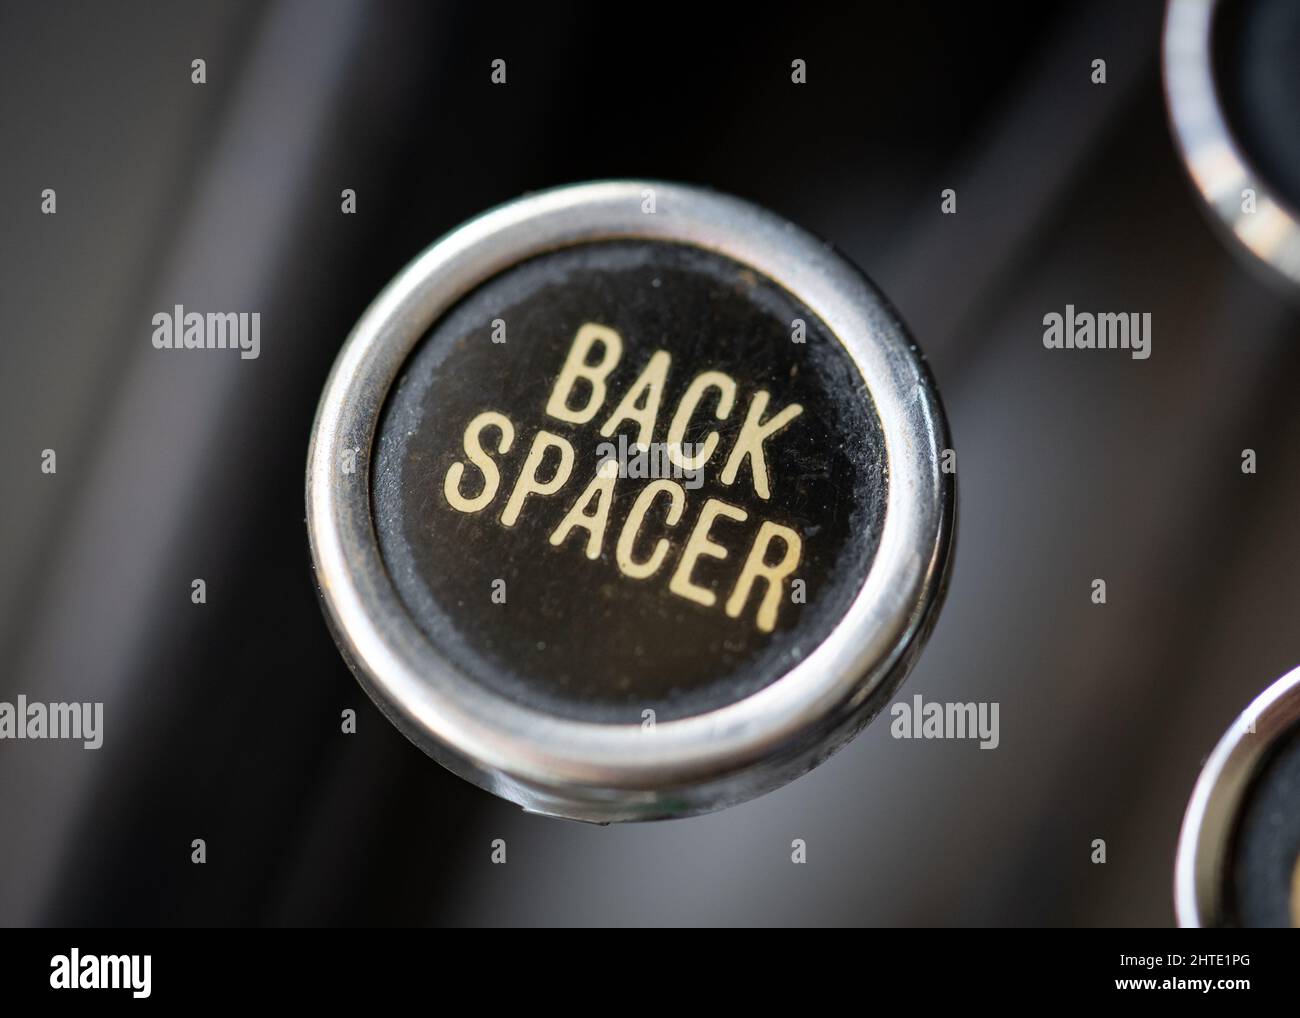 Retro vintage back spacer typewriter circular round key closeup with gold coloured back space key on black background. Stock Photo